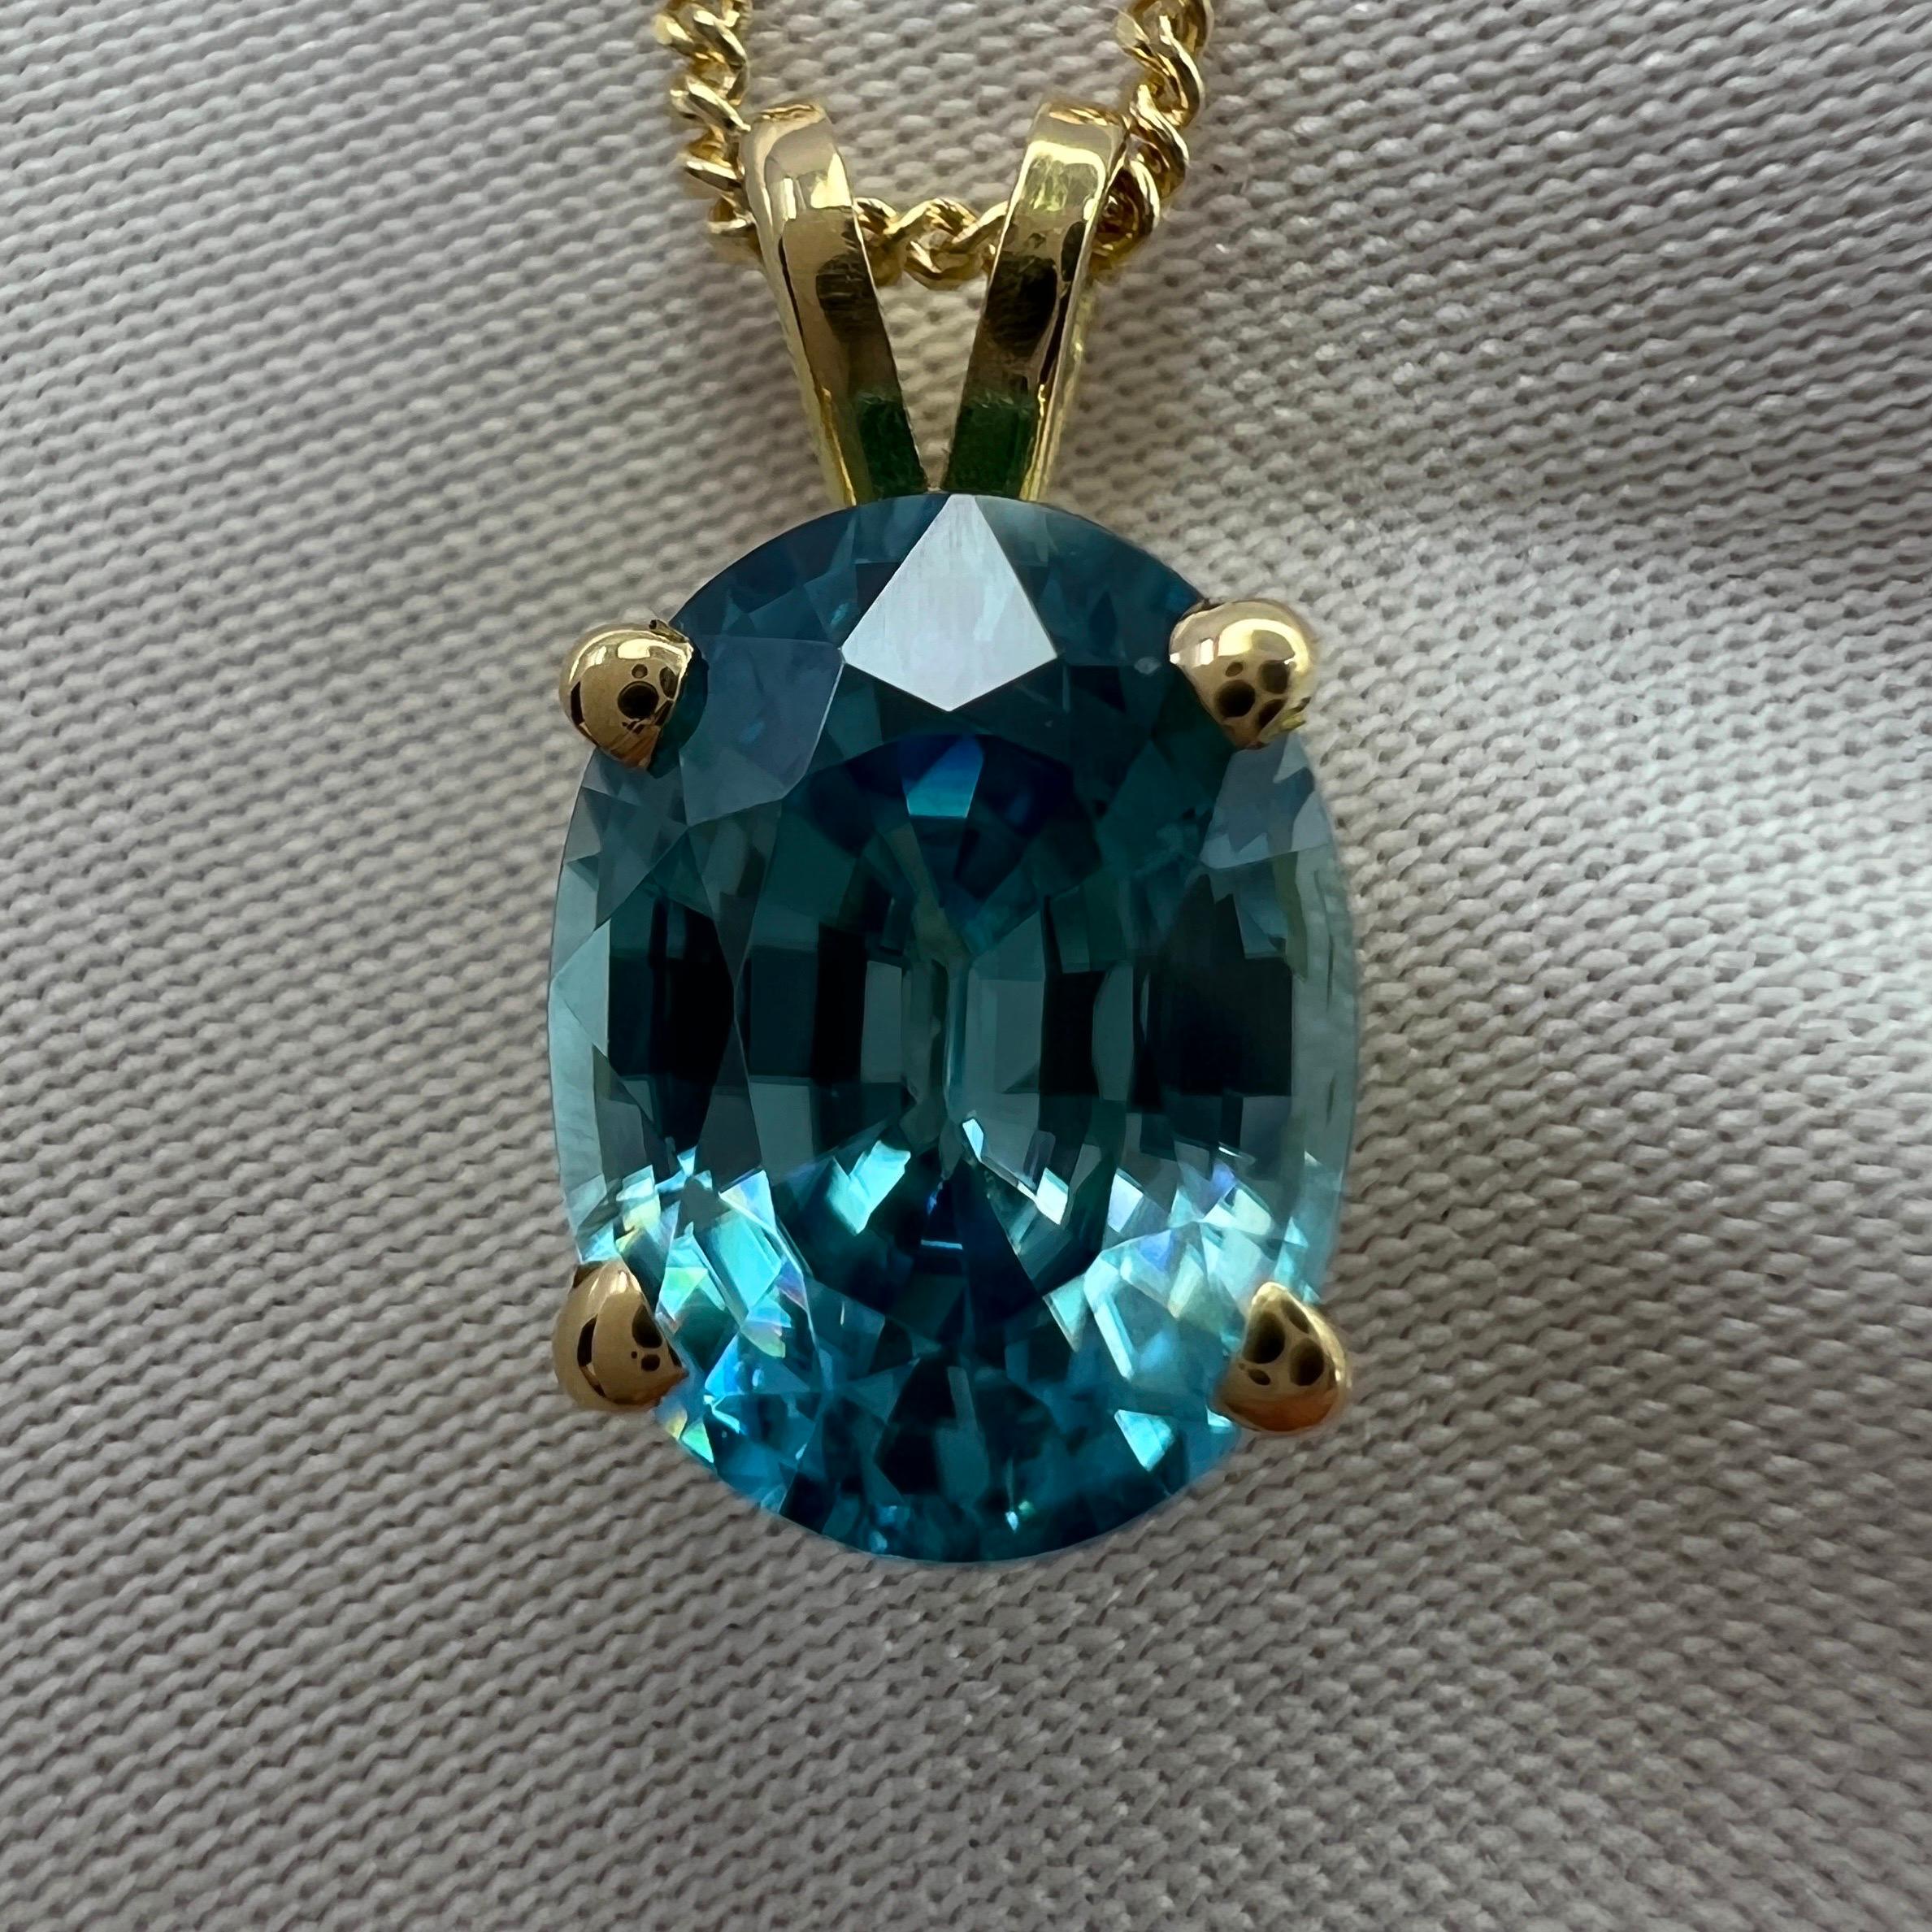 Vivid Neon Blue Natural Zircon Oval Cut 18k Yellow Gold Pendant Necklace.

Beautiful natural 3.10 carat blue zircon set in a fine 18k yellow gold solitaire pendant. Stunning blue zircon with a vivid neon blue colour and excellent clarity, very clean